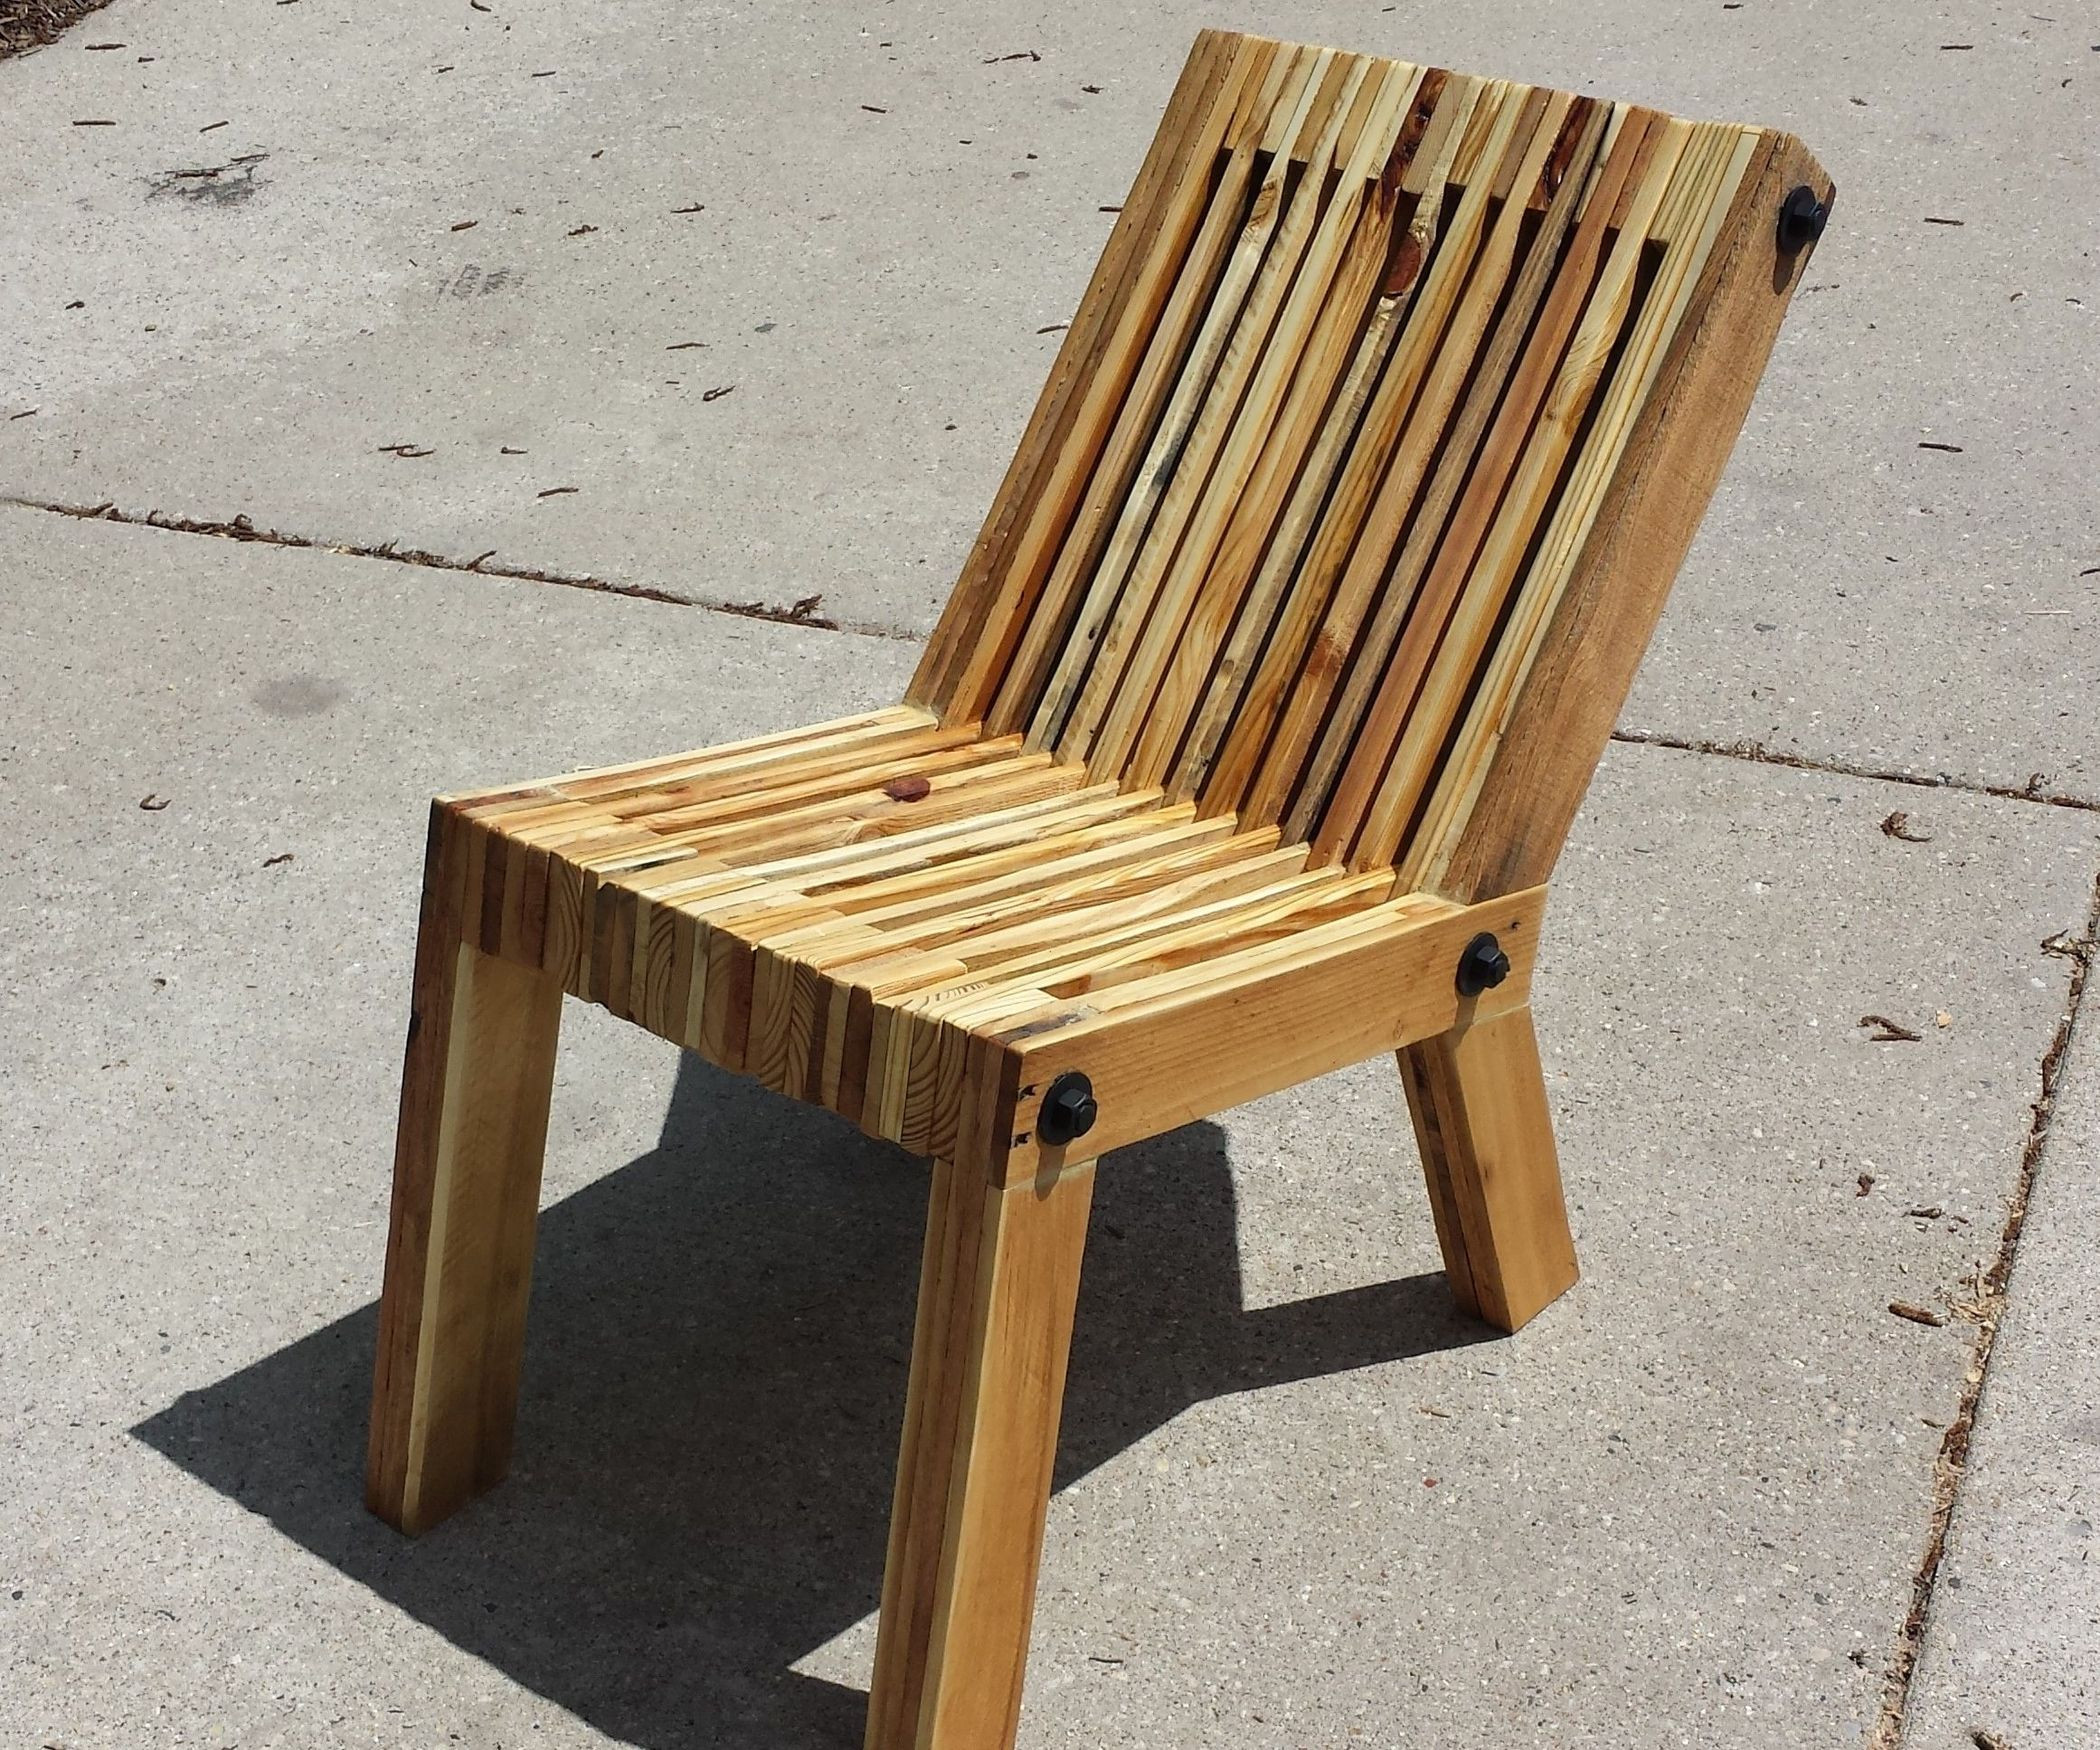 Best ideas about DIY Wood Chairs
. Save or Pin Reclined Pallet Wood Chair 11 Steps with Now.